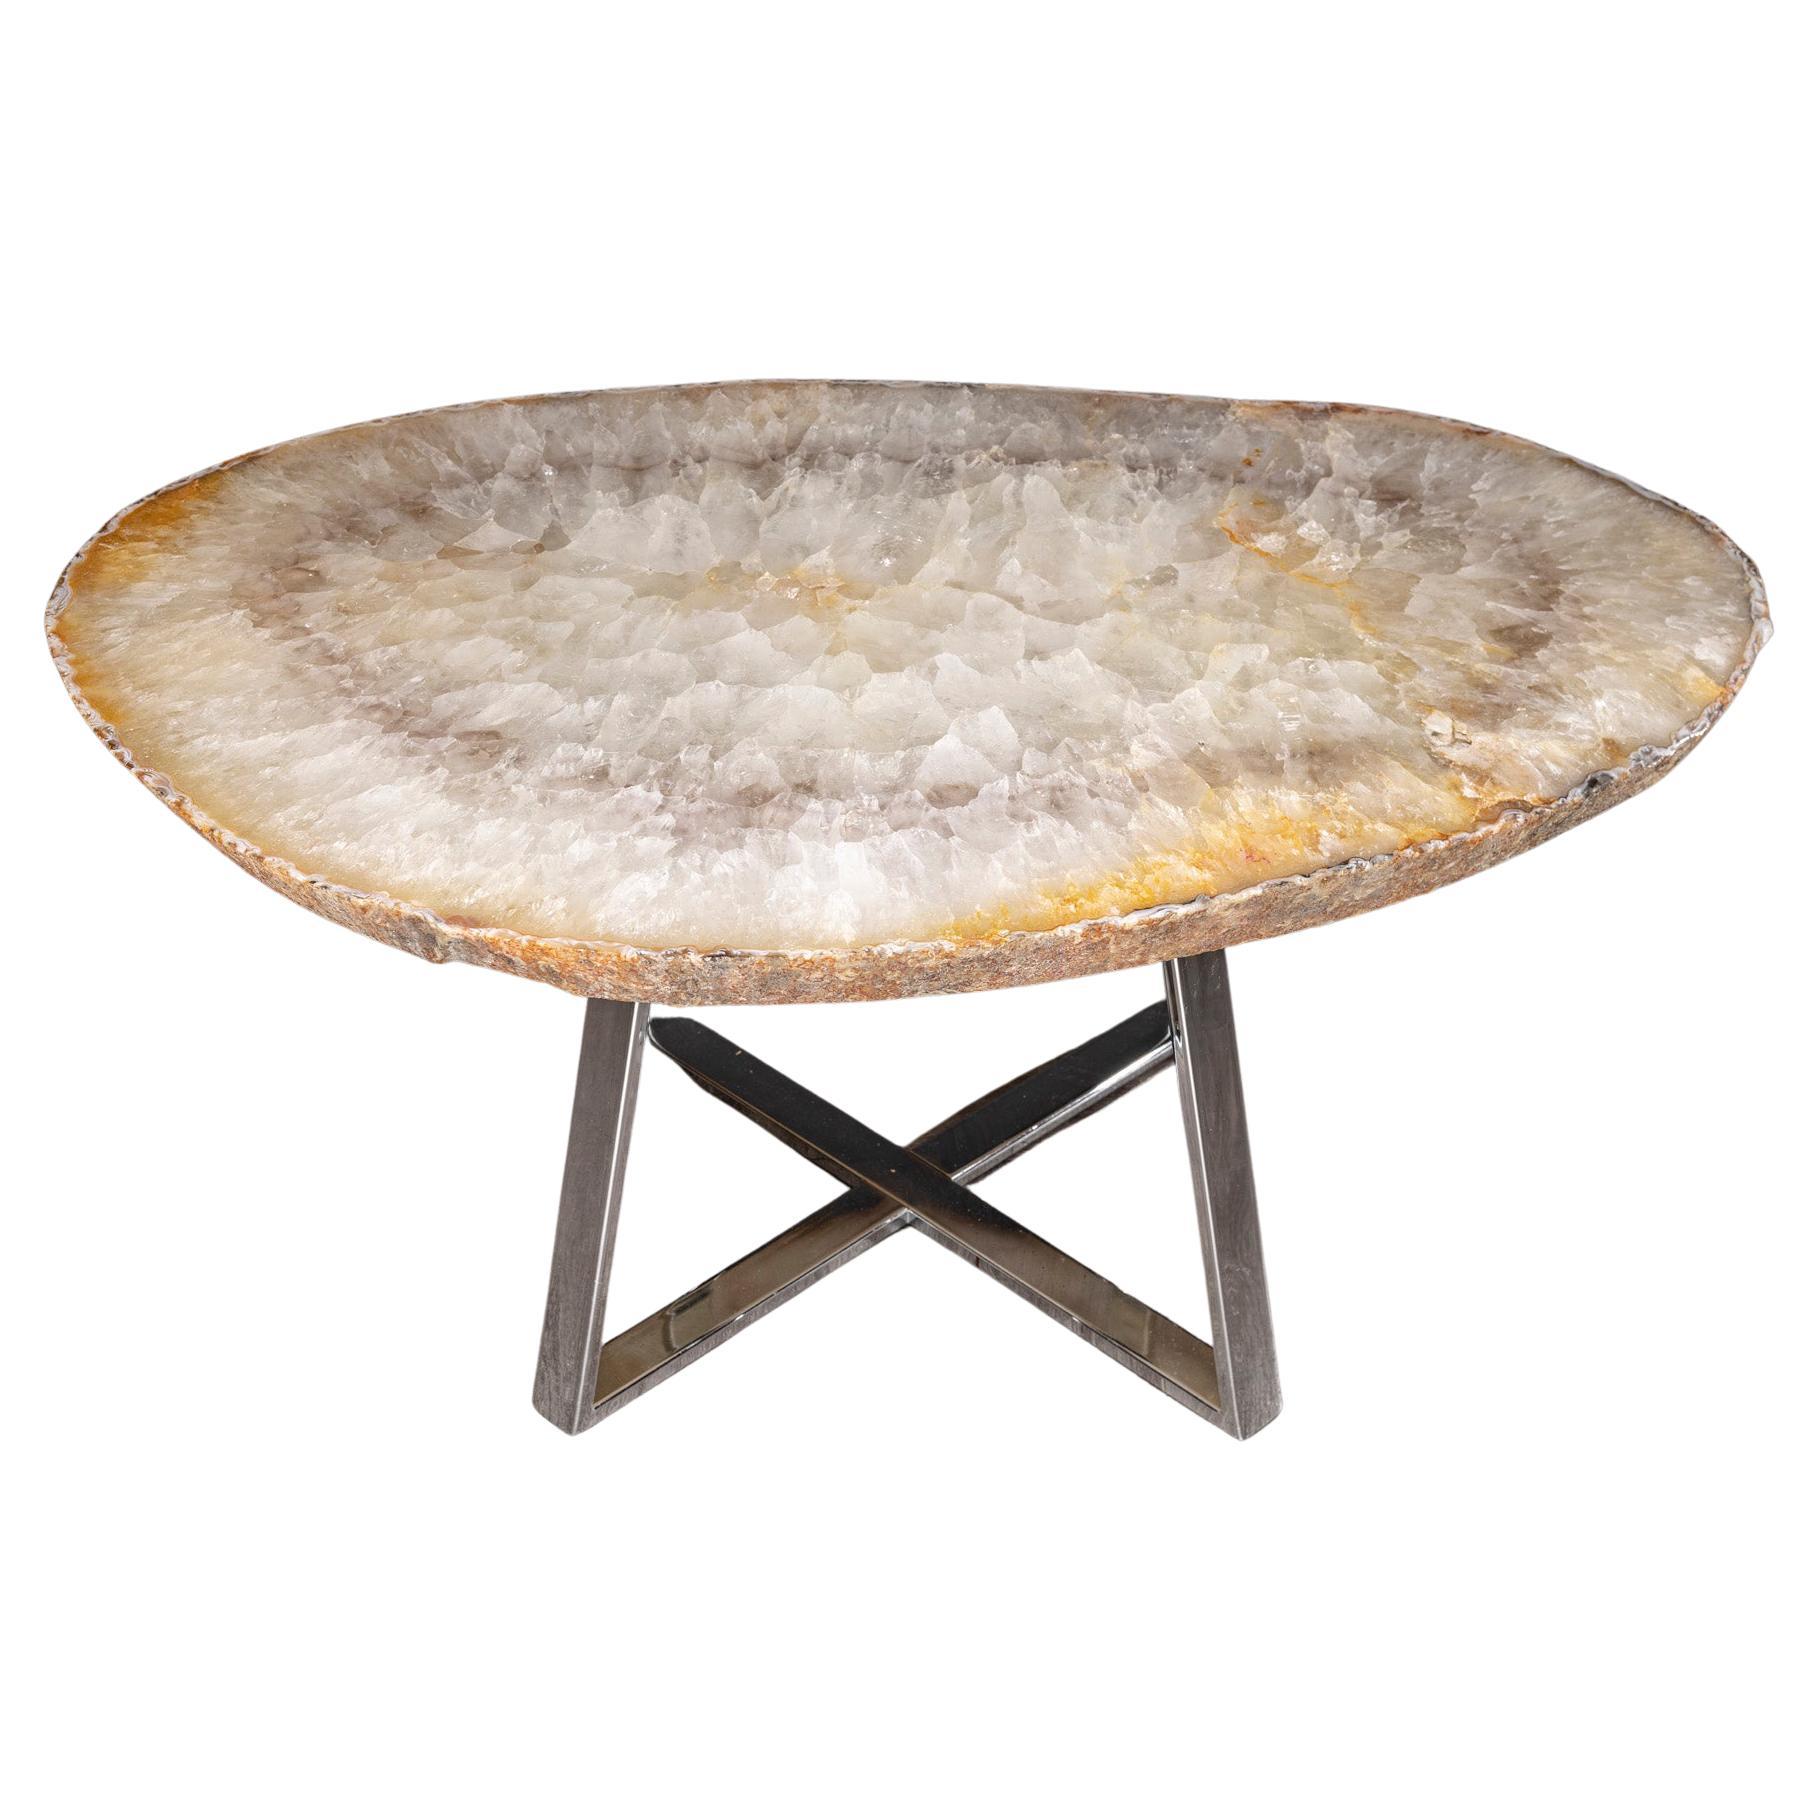 Side or Center Table, Brazilian Agate with Nickel Finish Metal Base For Sale